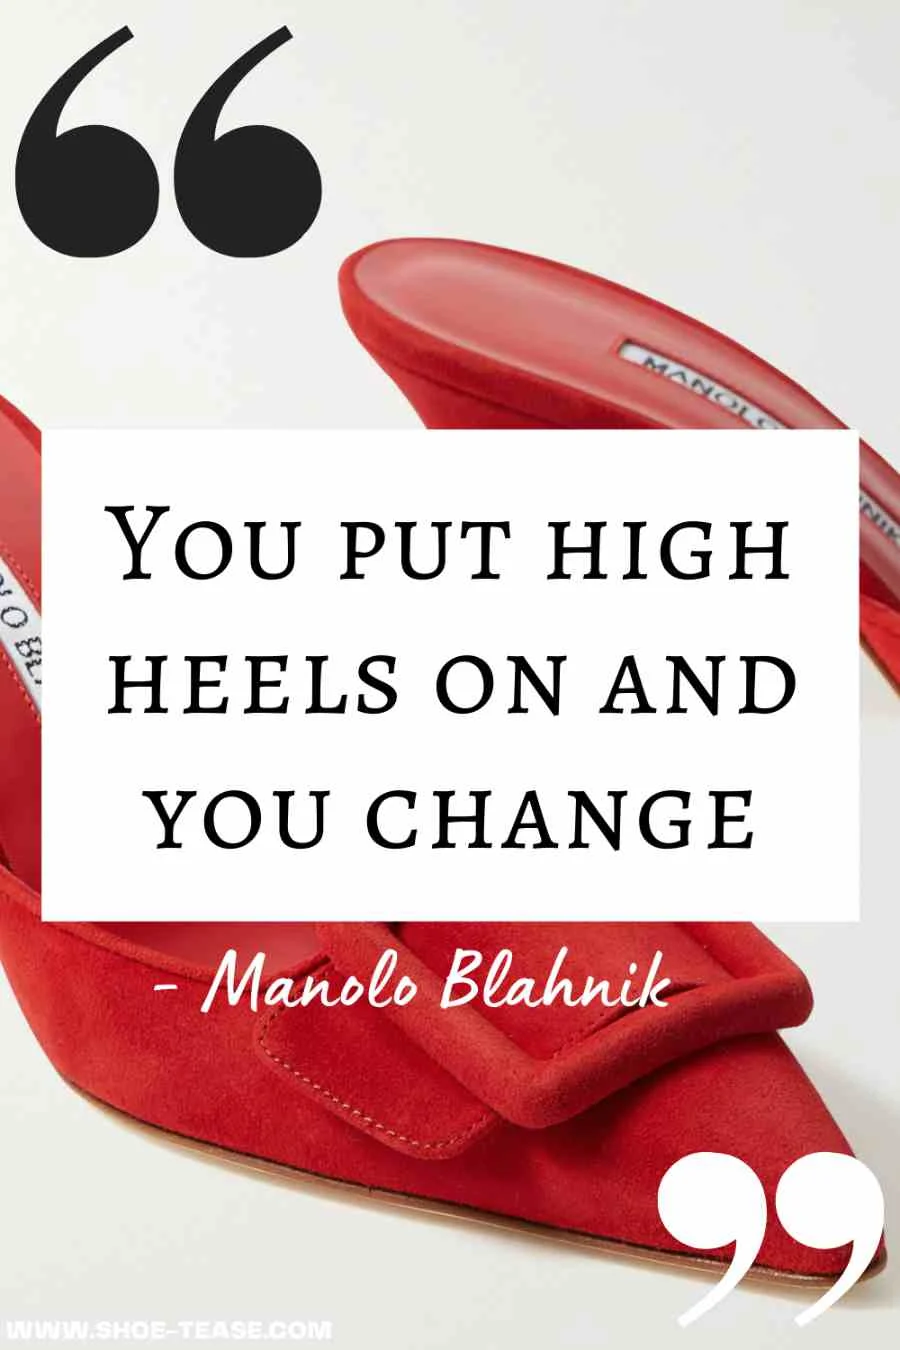 It's Not That I Need New Shoes, But They Keep Making Them In My Size.:  Beautiful Women's & Teens Inspirational and Funny Quotes About life ... a  Daughter Granddaughter Sister Friend Work